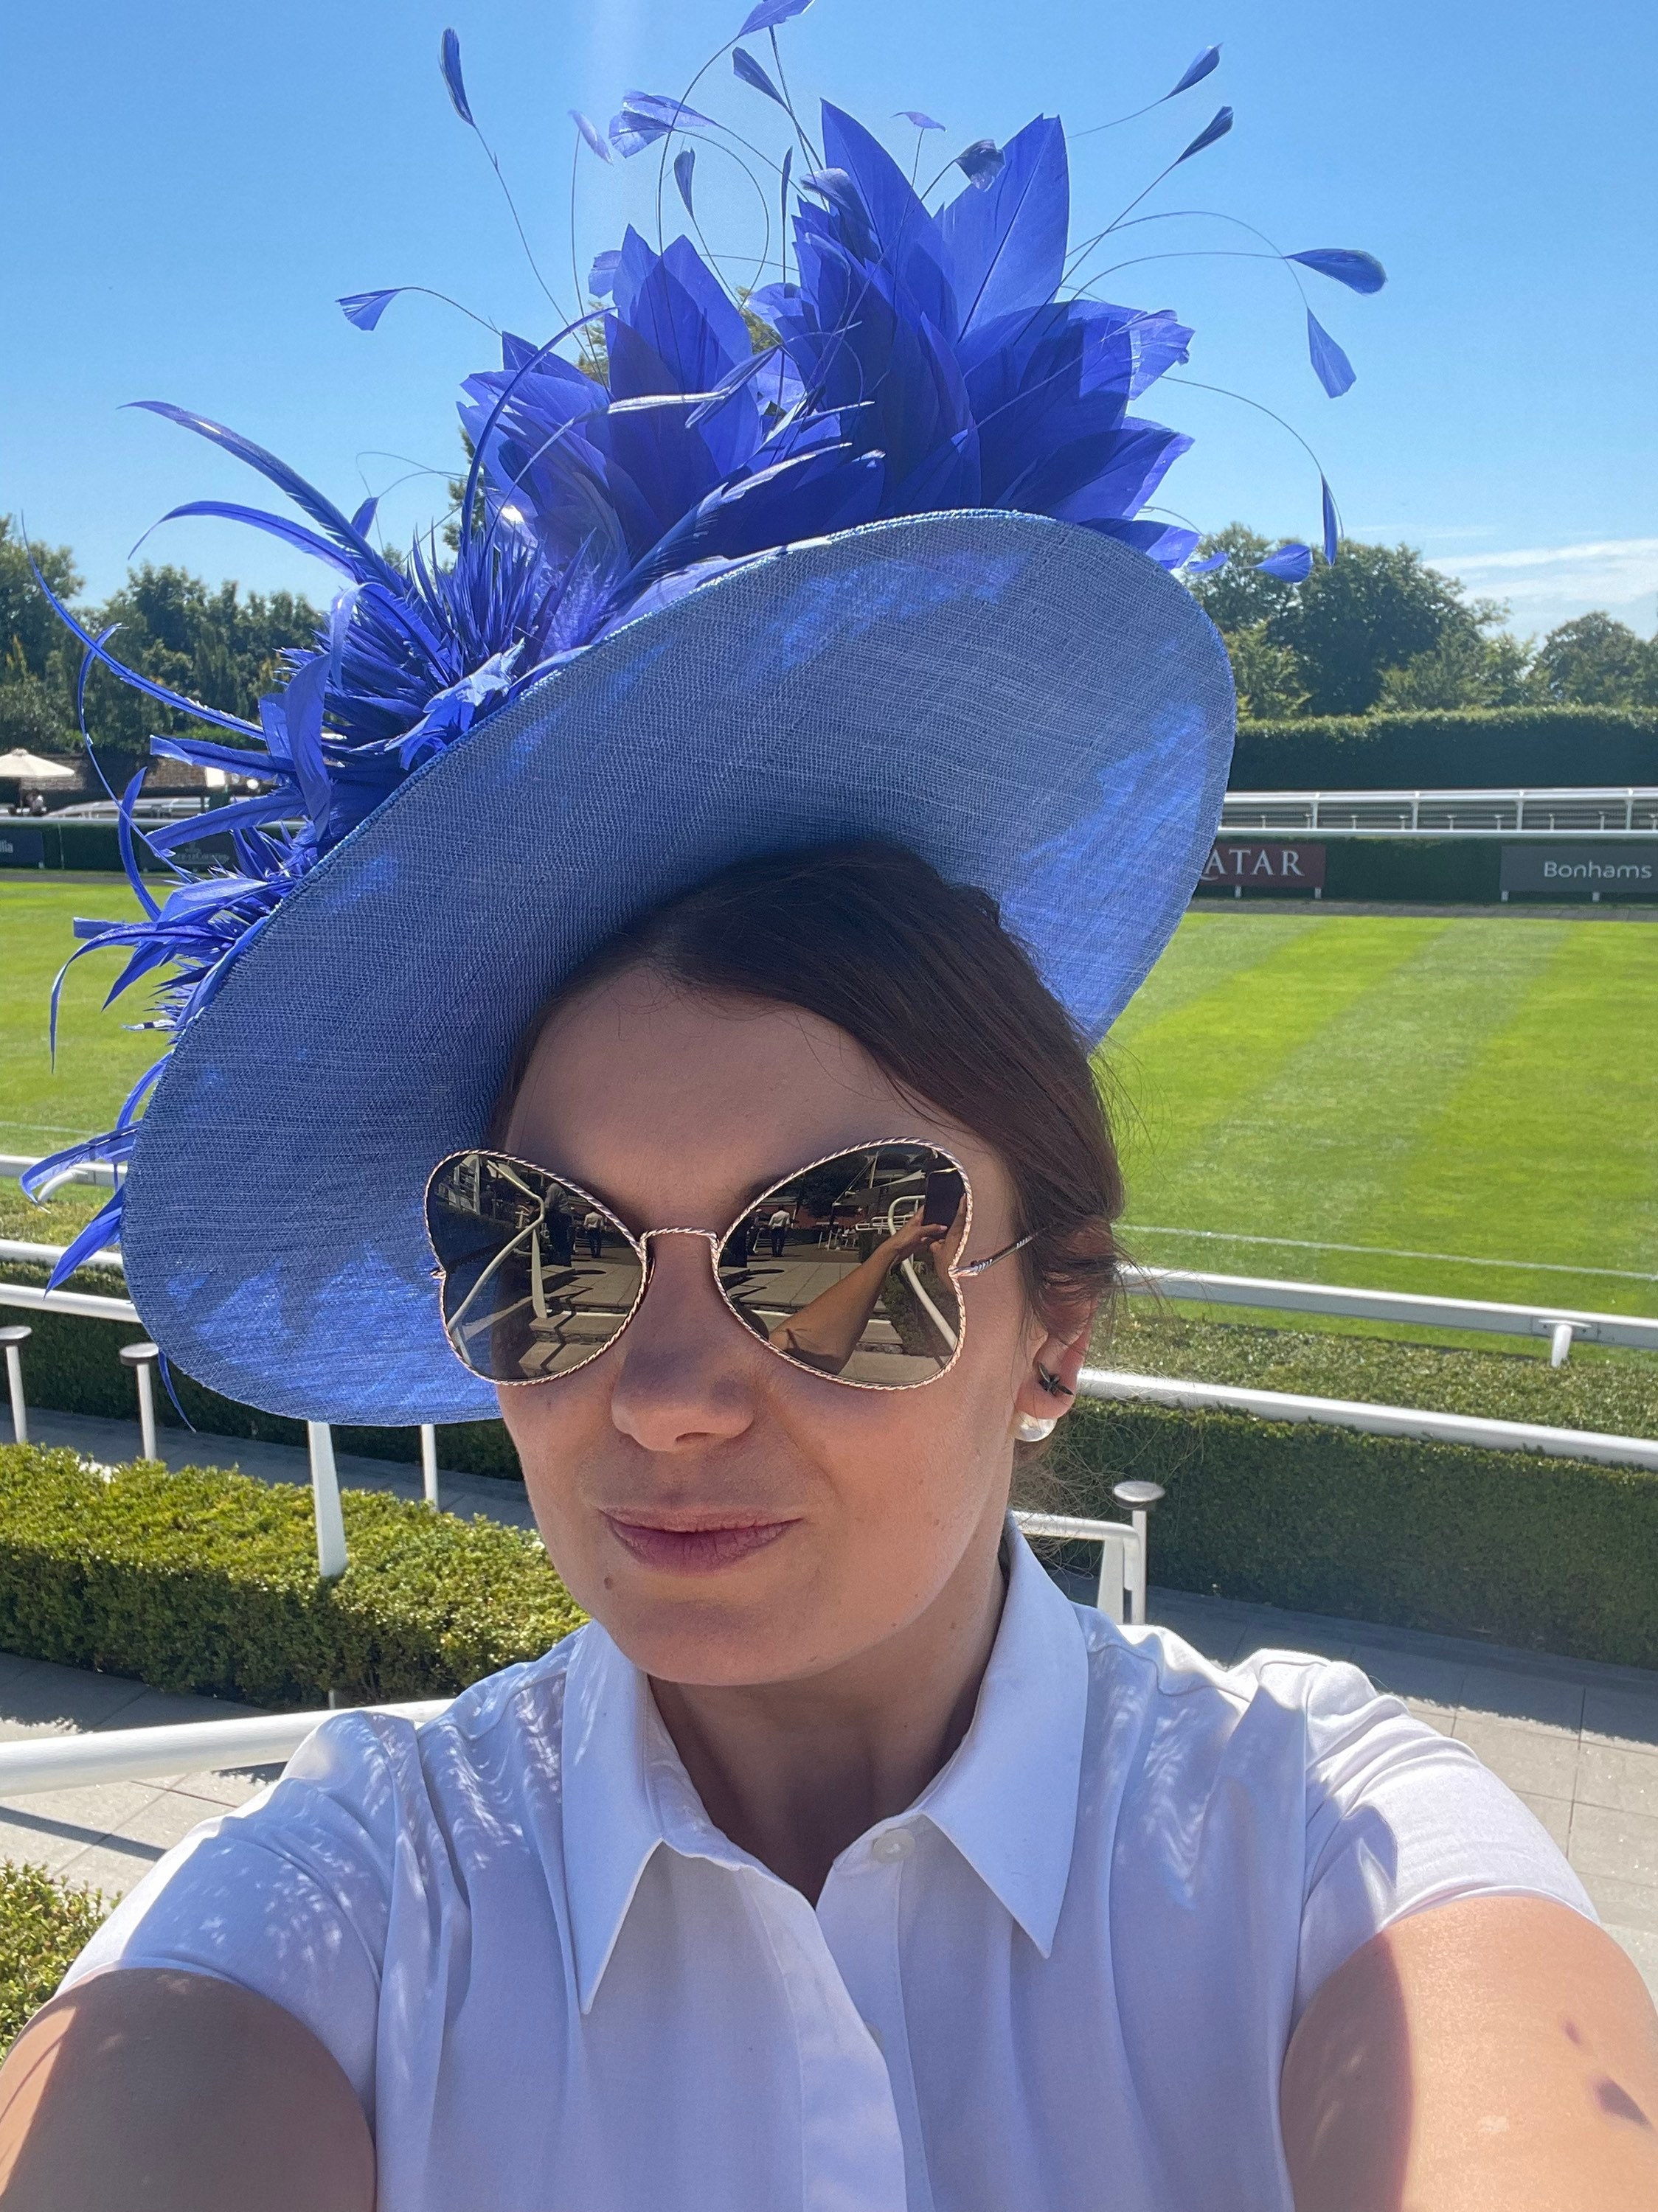 FrogAndCrown17 Royal Blue Boater Hat, Electric Blue , Royal Blue Fascinator, Feathers Flowers Any Colour Made to to Order Anna Gilder Millinery